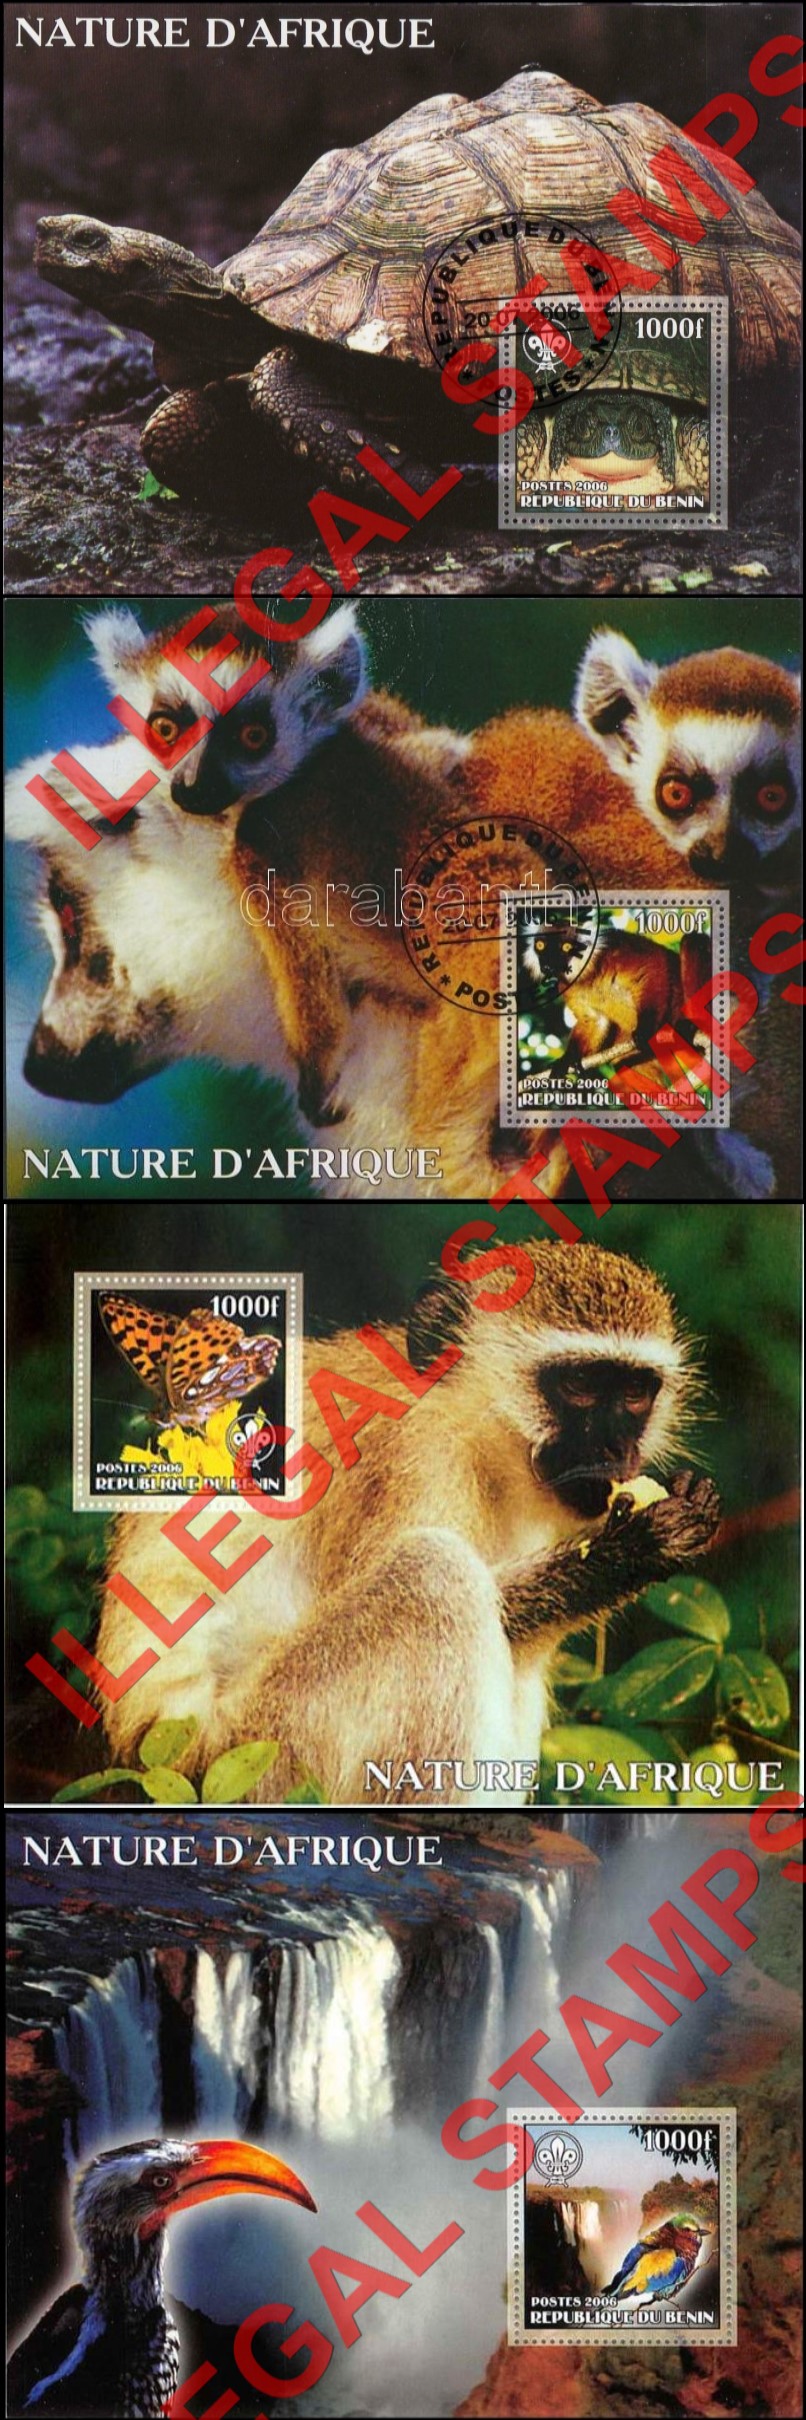 Benin 2006 Nature of Africa Illegal Stamp Souvenir Sheets of 1 (Part 4)